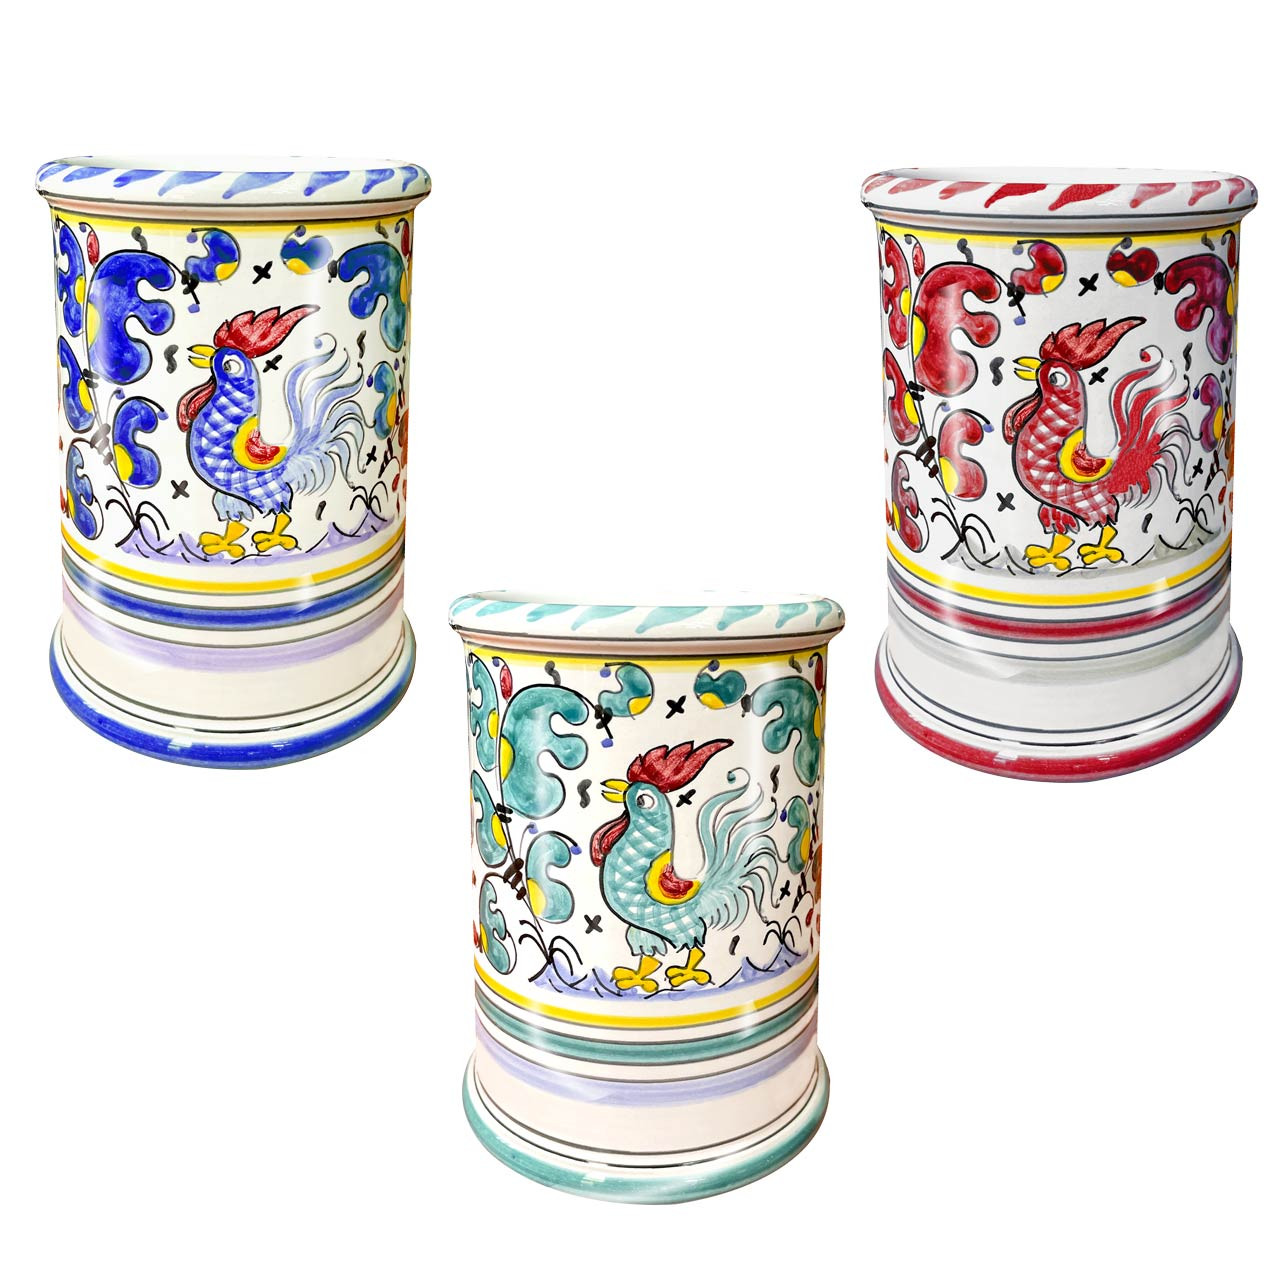 https://cdn11.bigcommerce.com/s-ukqi7wk1fh/images/stencil/1280x1280/products/1959/5697/Deruta-Ceramic-Utensil-Holder-made-in-Italy-Galletto-decoration__43525.1664725807.jpg?c=2